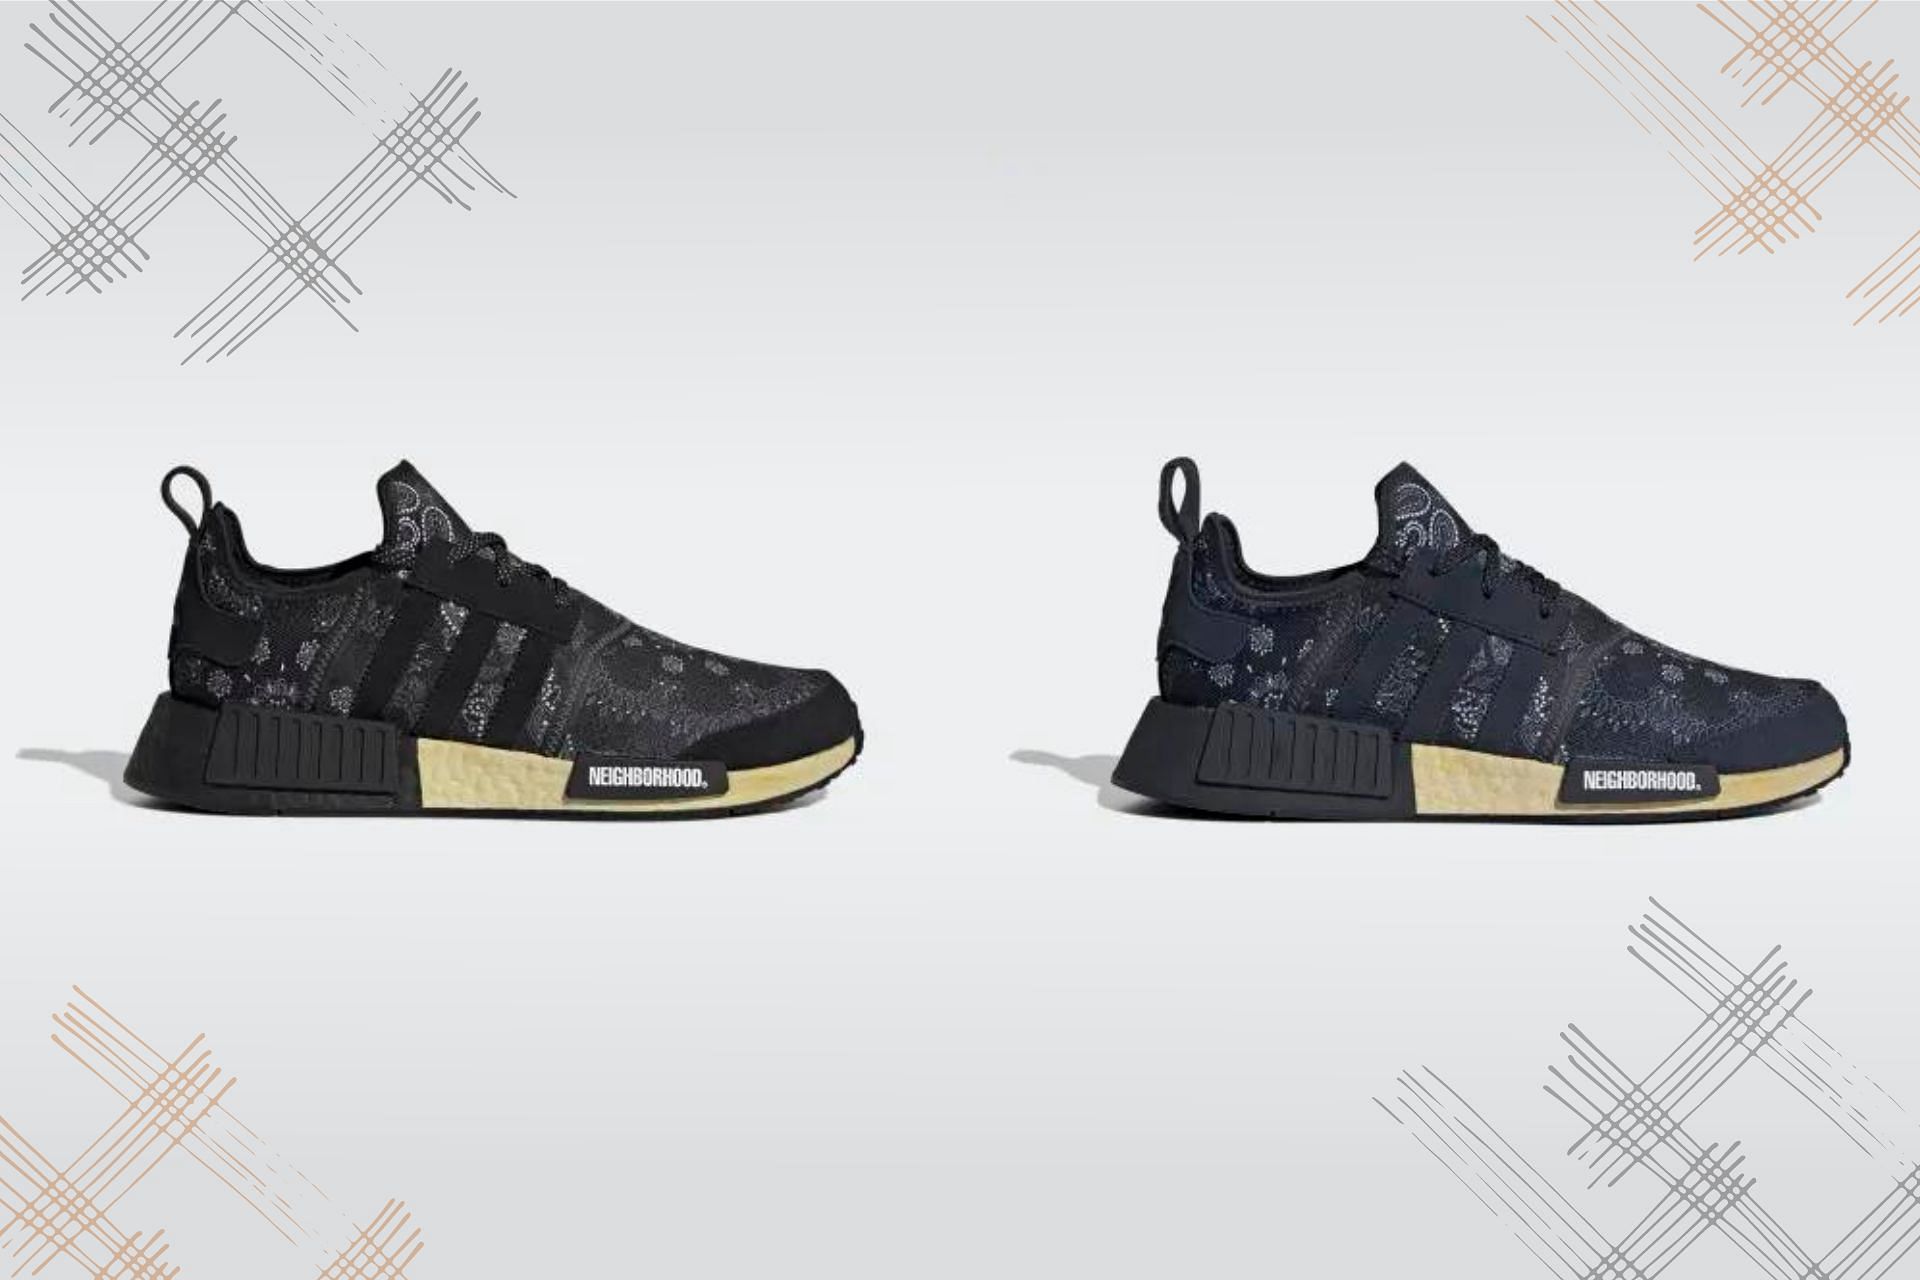 Where to buy Neighborhood x Adidas NMD R1 footwear pack? Price, date, and more explored